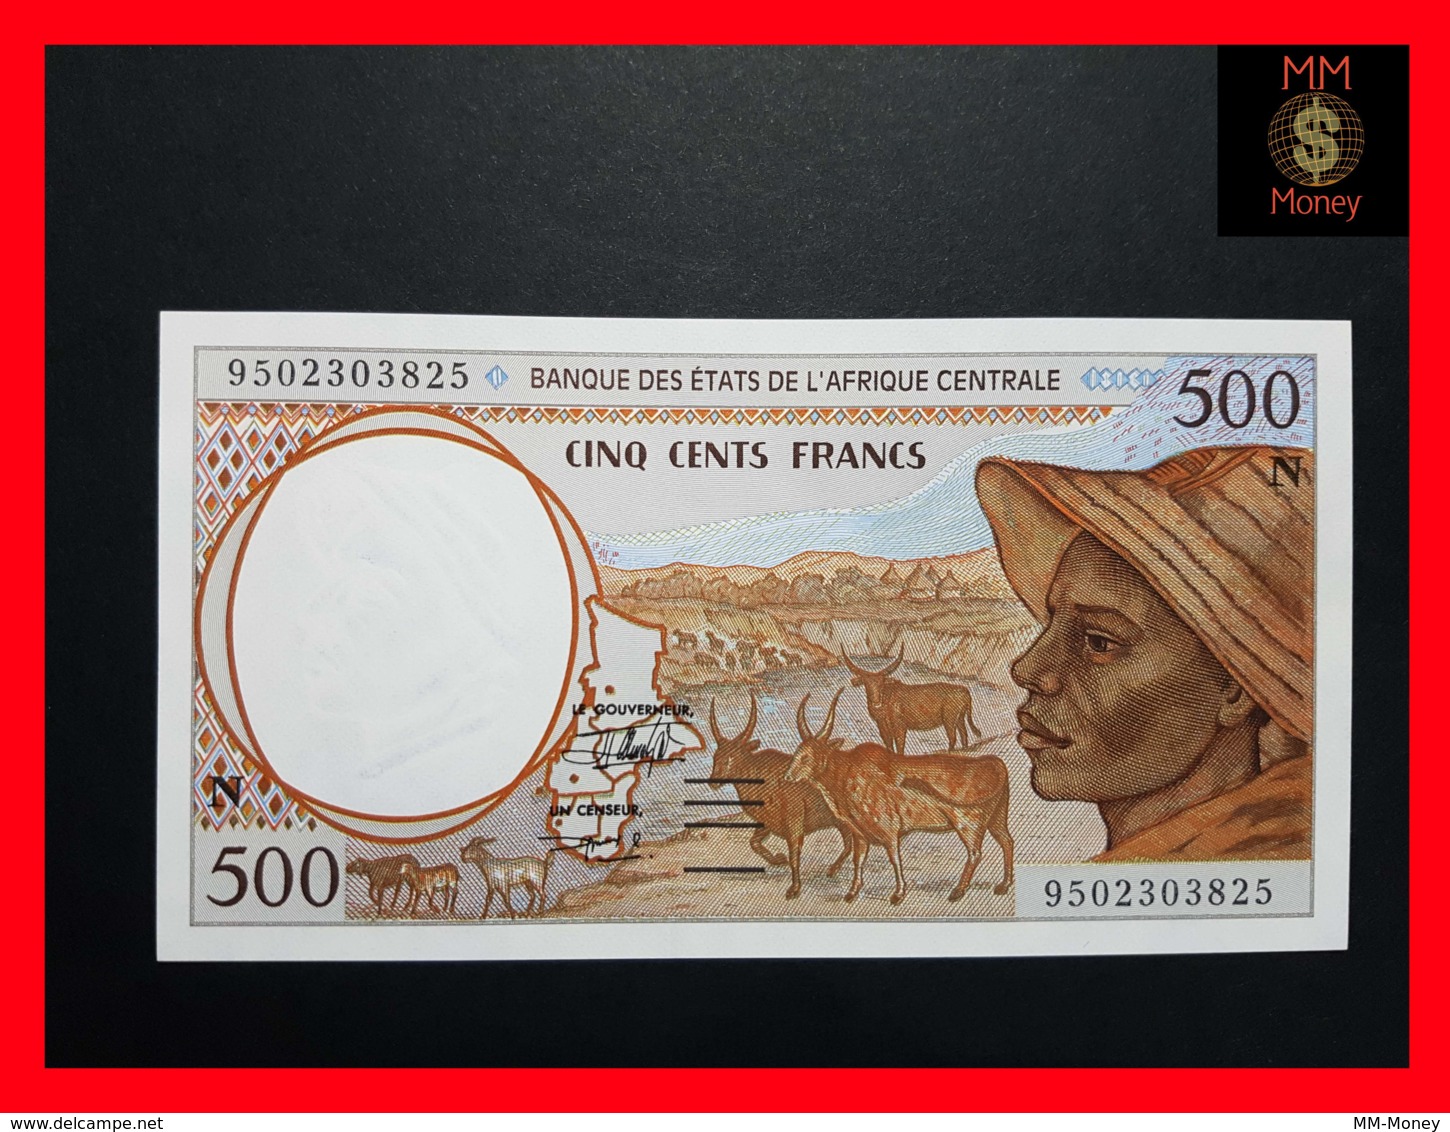 CENTRAL AFRICAN STATES  "N"  EQUATORIAL GUINEA 500 Francs 1995  P. 501 N C  UNC - Stati Centrafricani